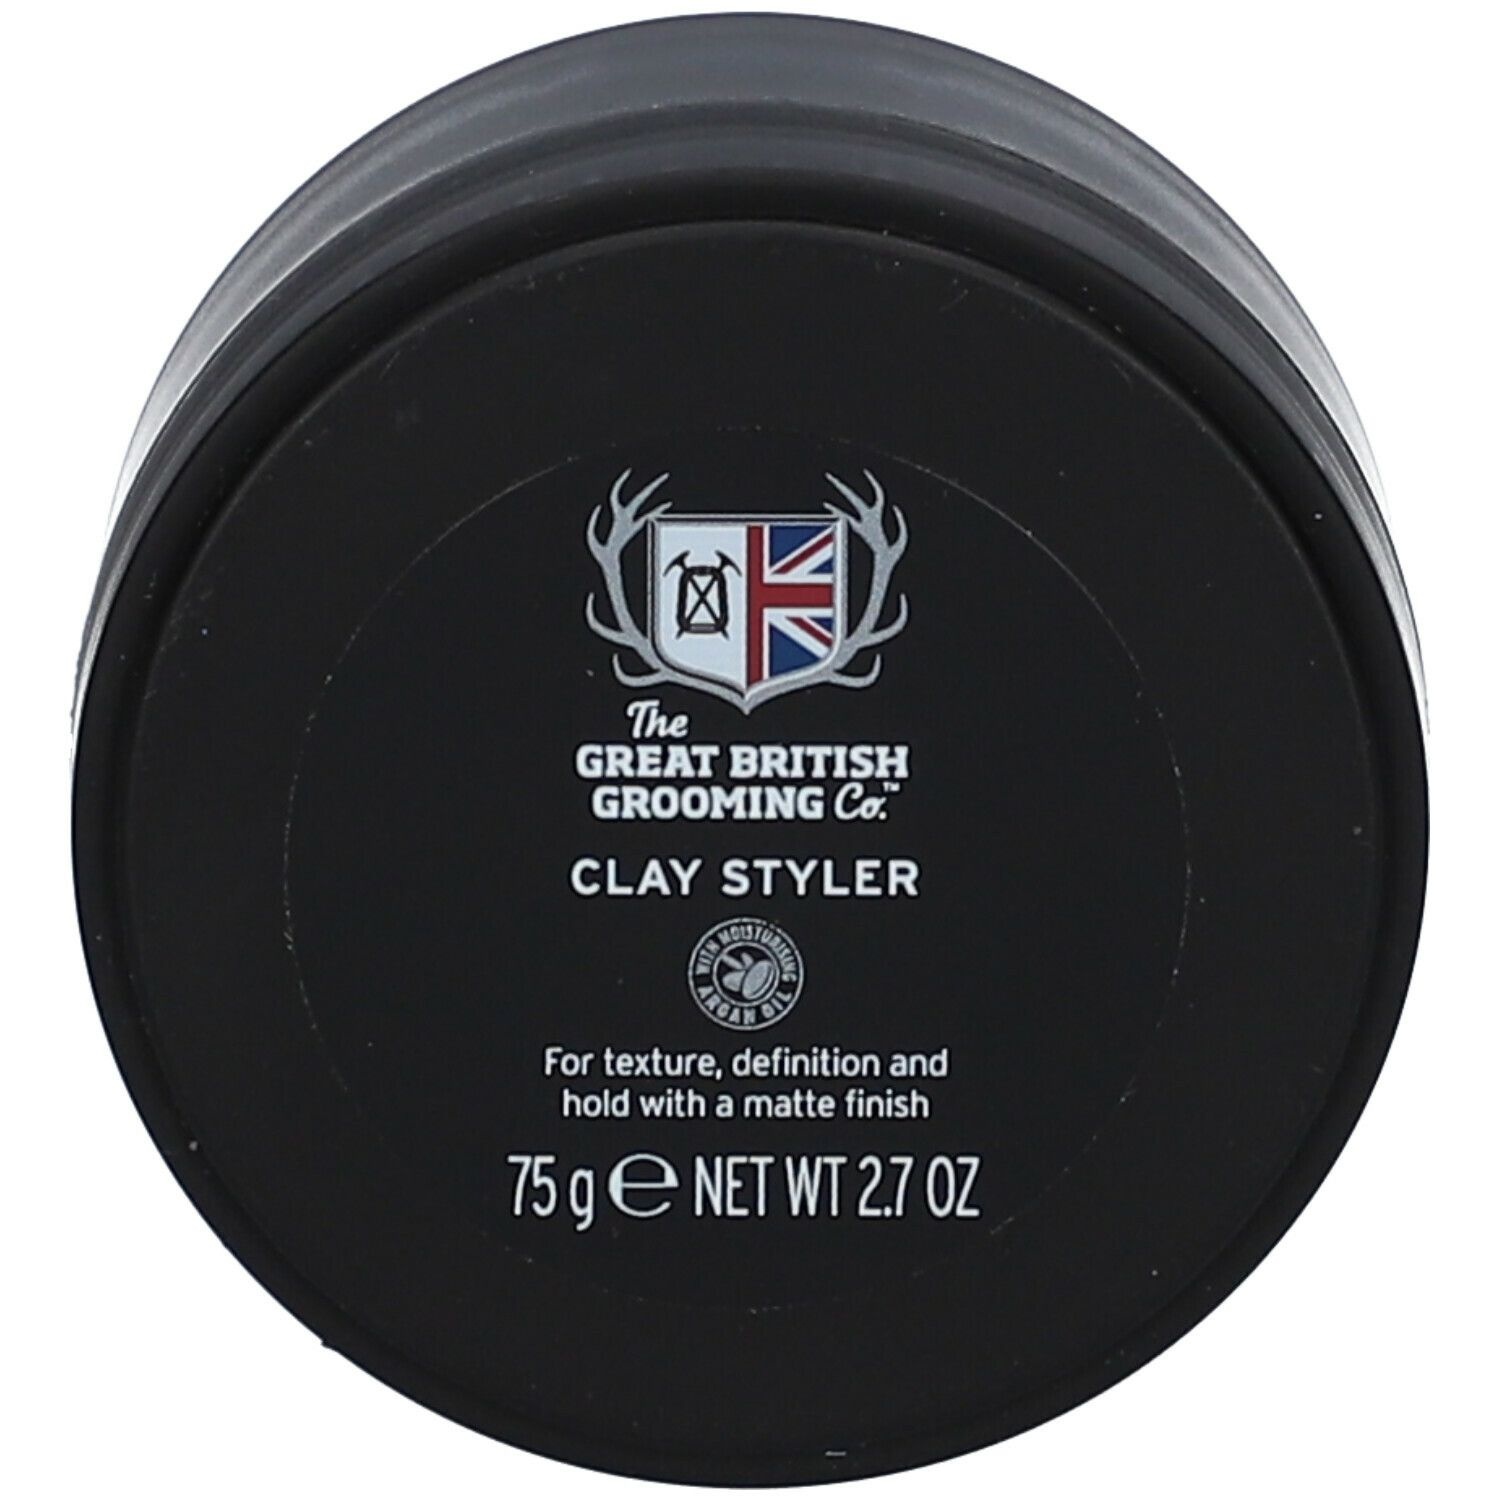 The Great British Grooming Co.TM Clay Styler